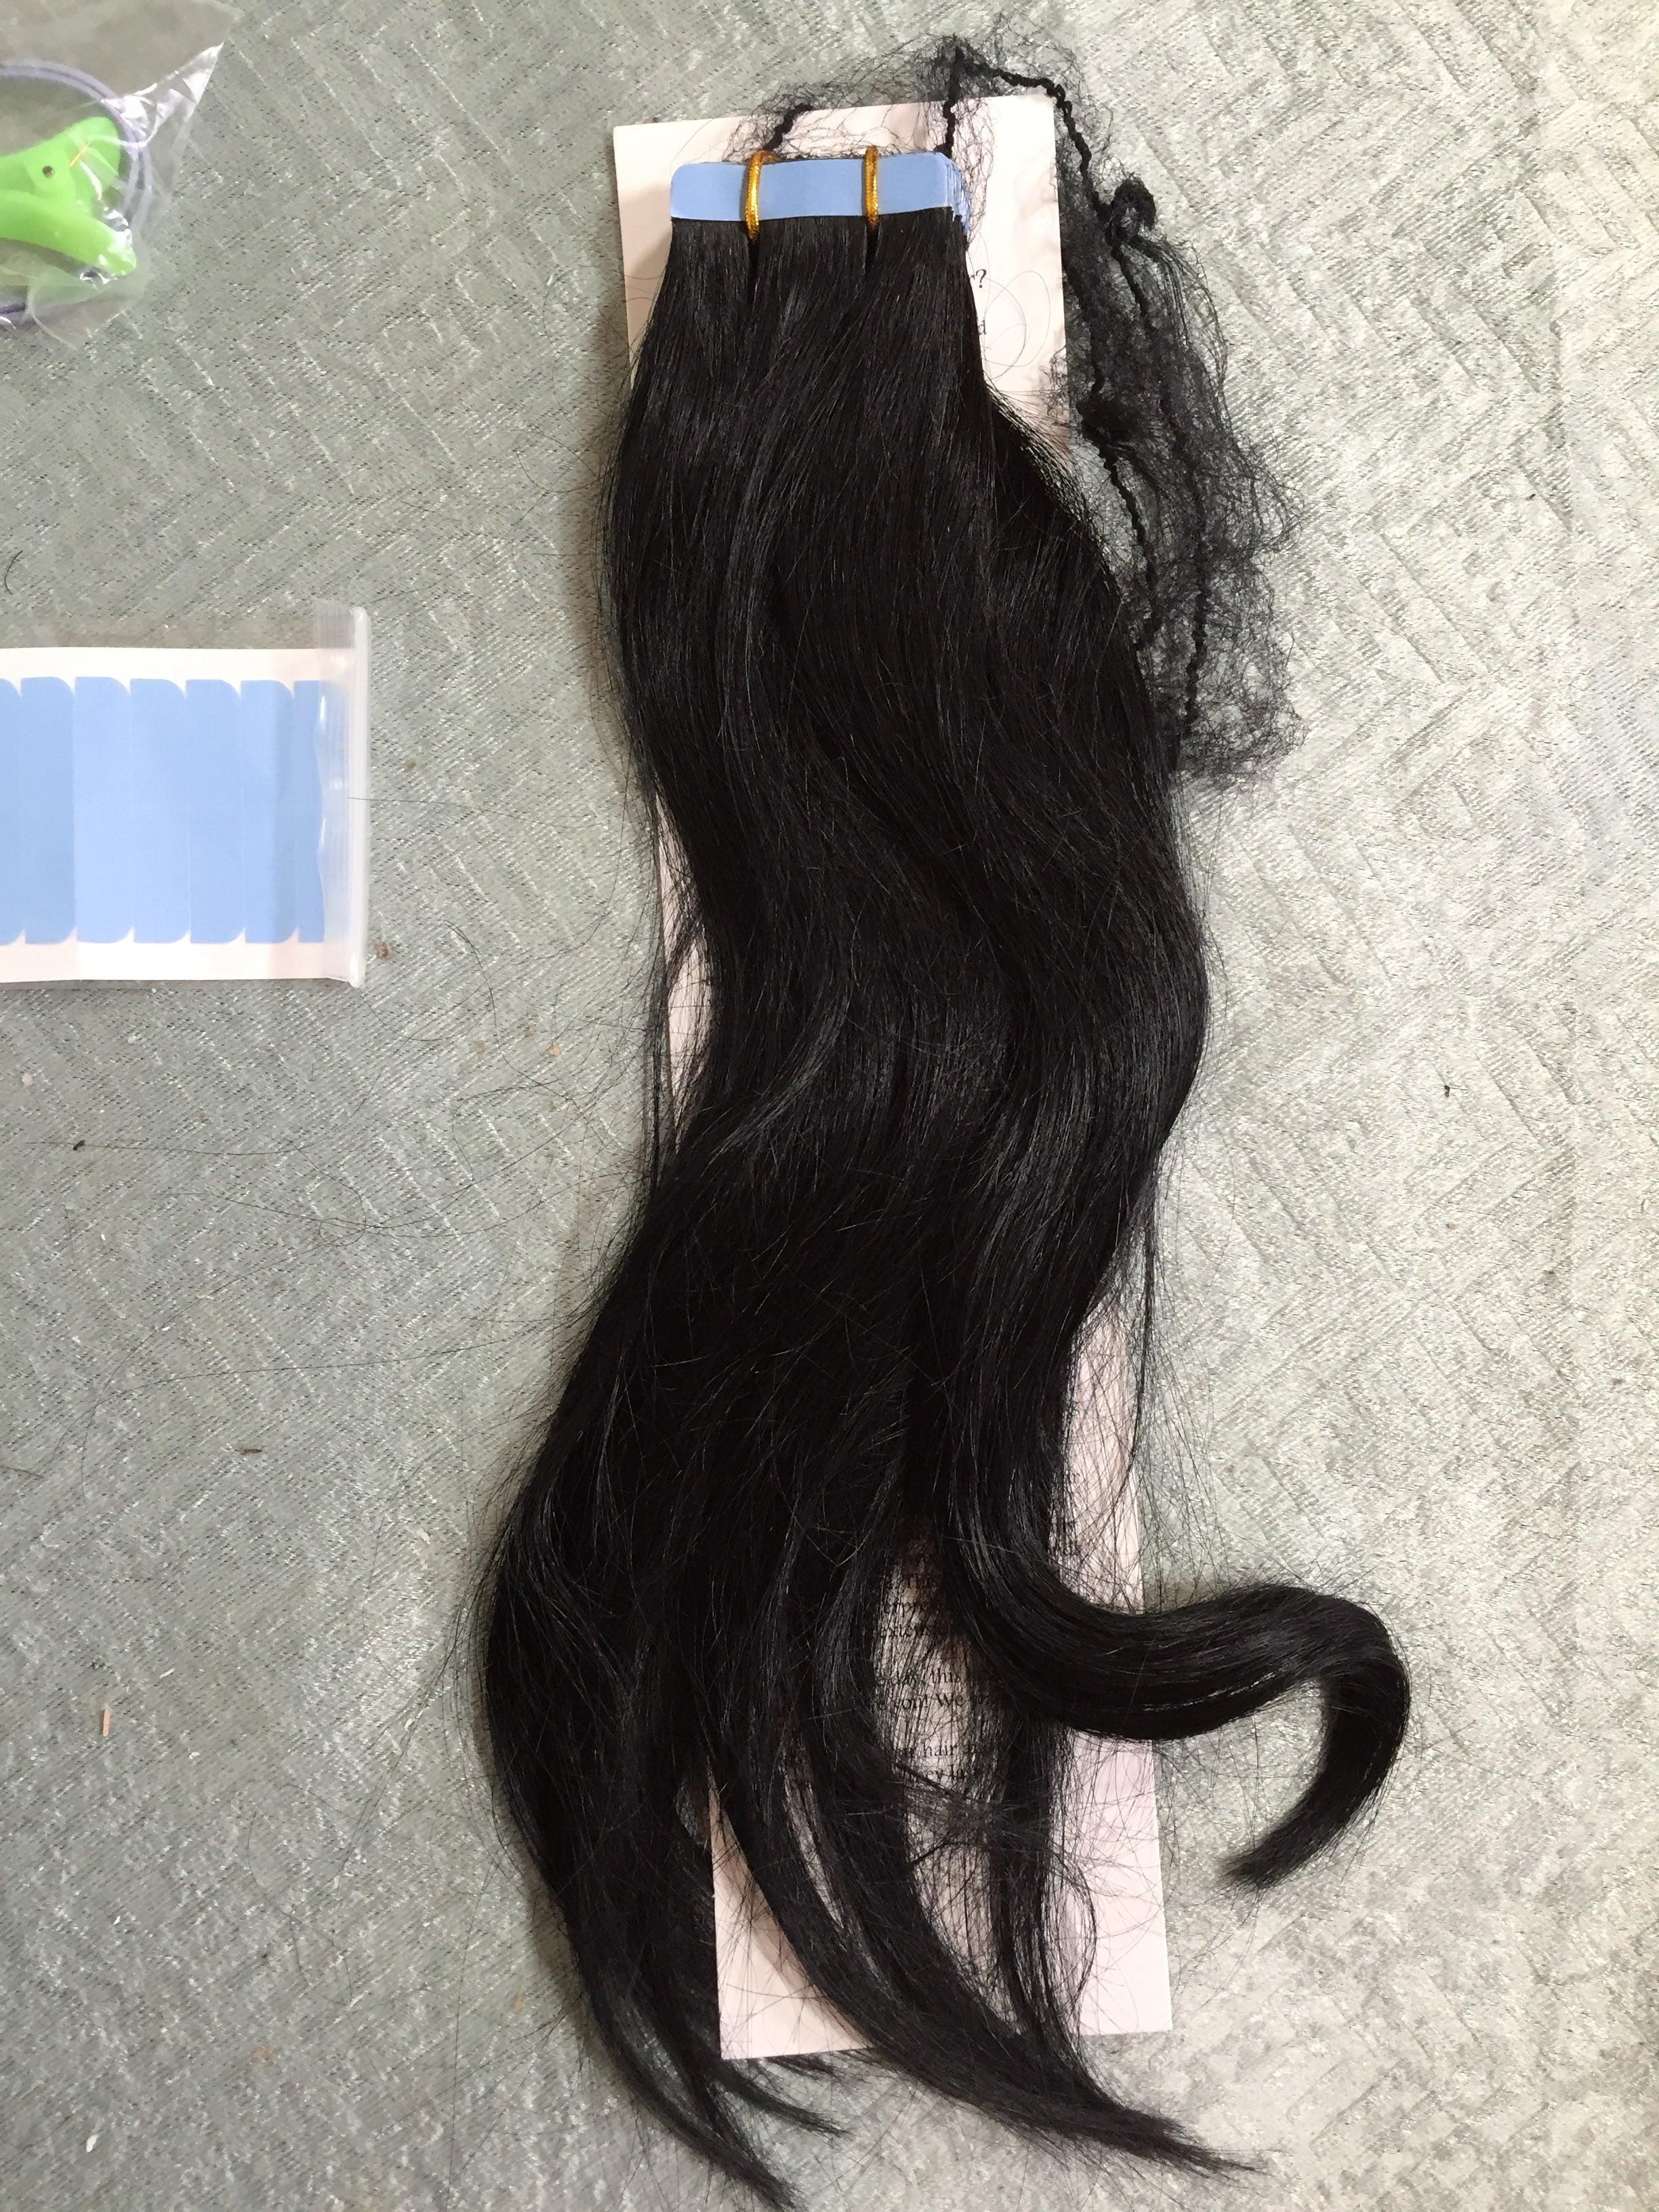 SUYYA Tape in Hair Extensions Natural Black 100% Remy Human Hair 12 Inches 20 Pcs (7607915413742)